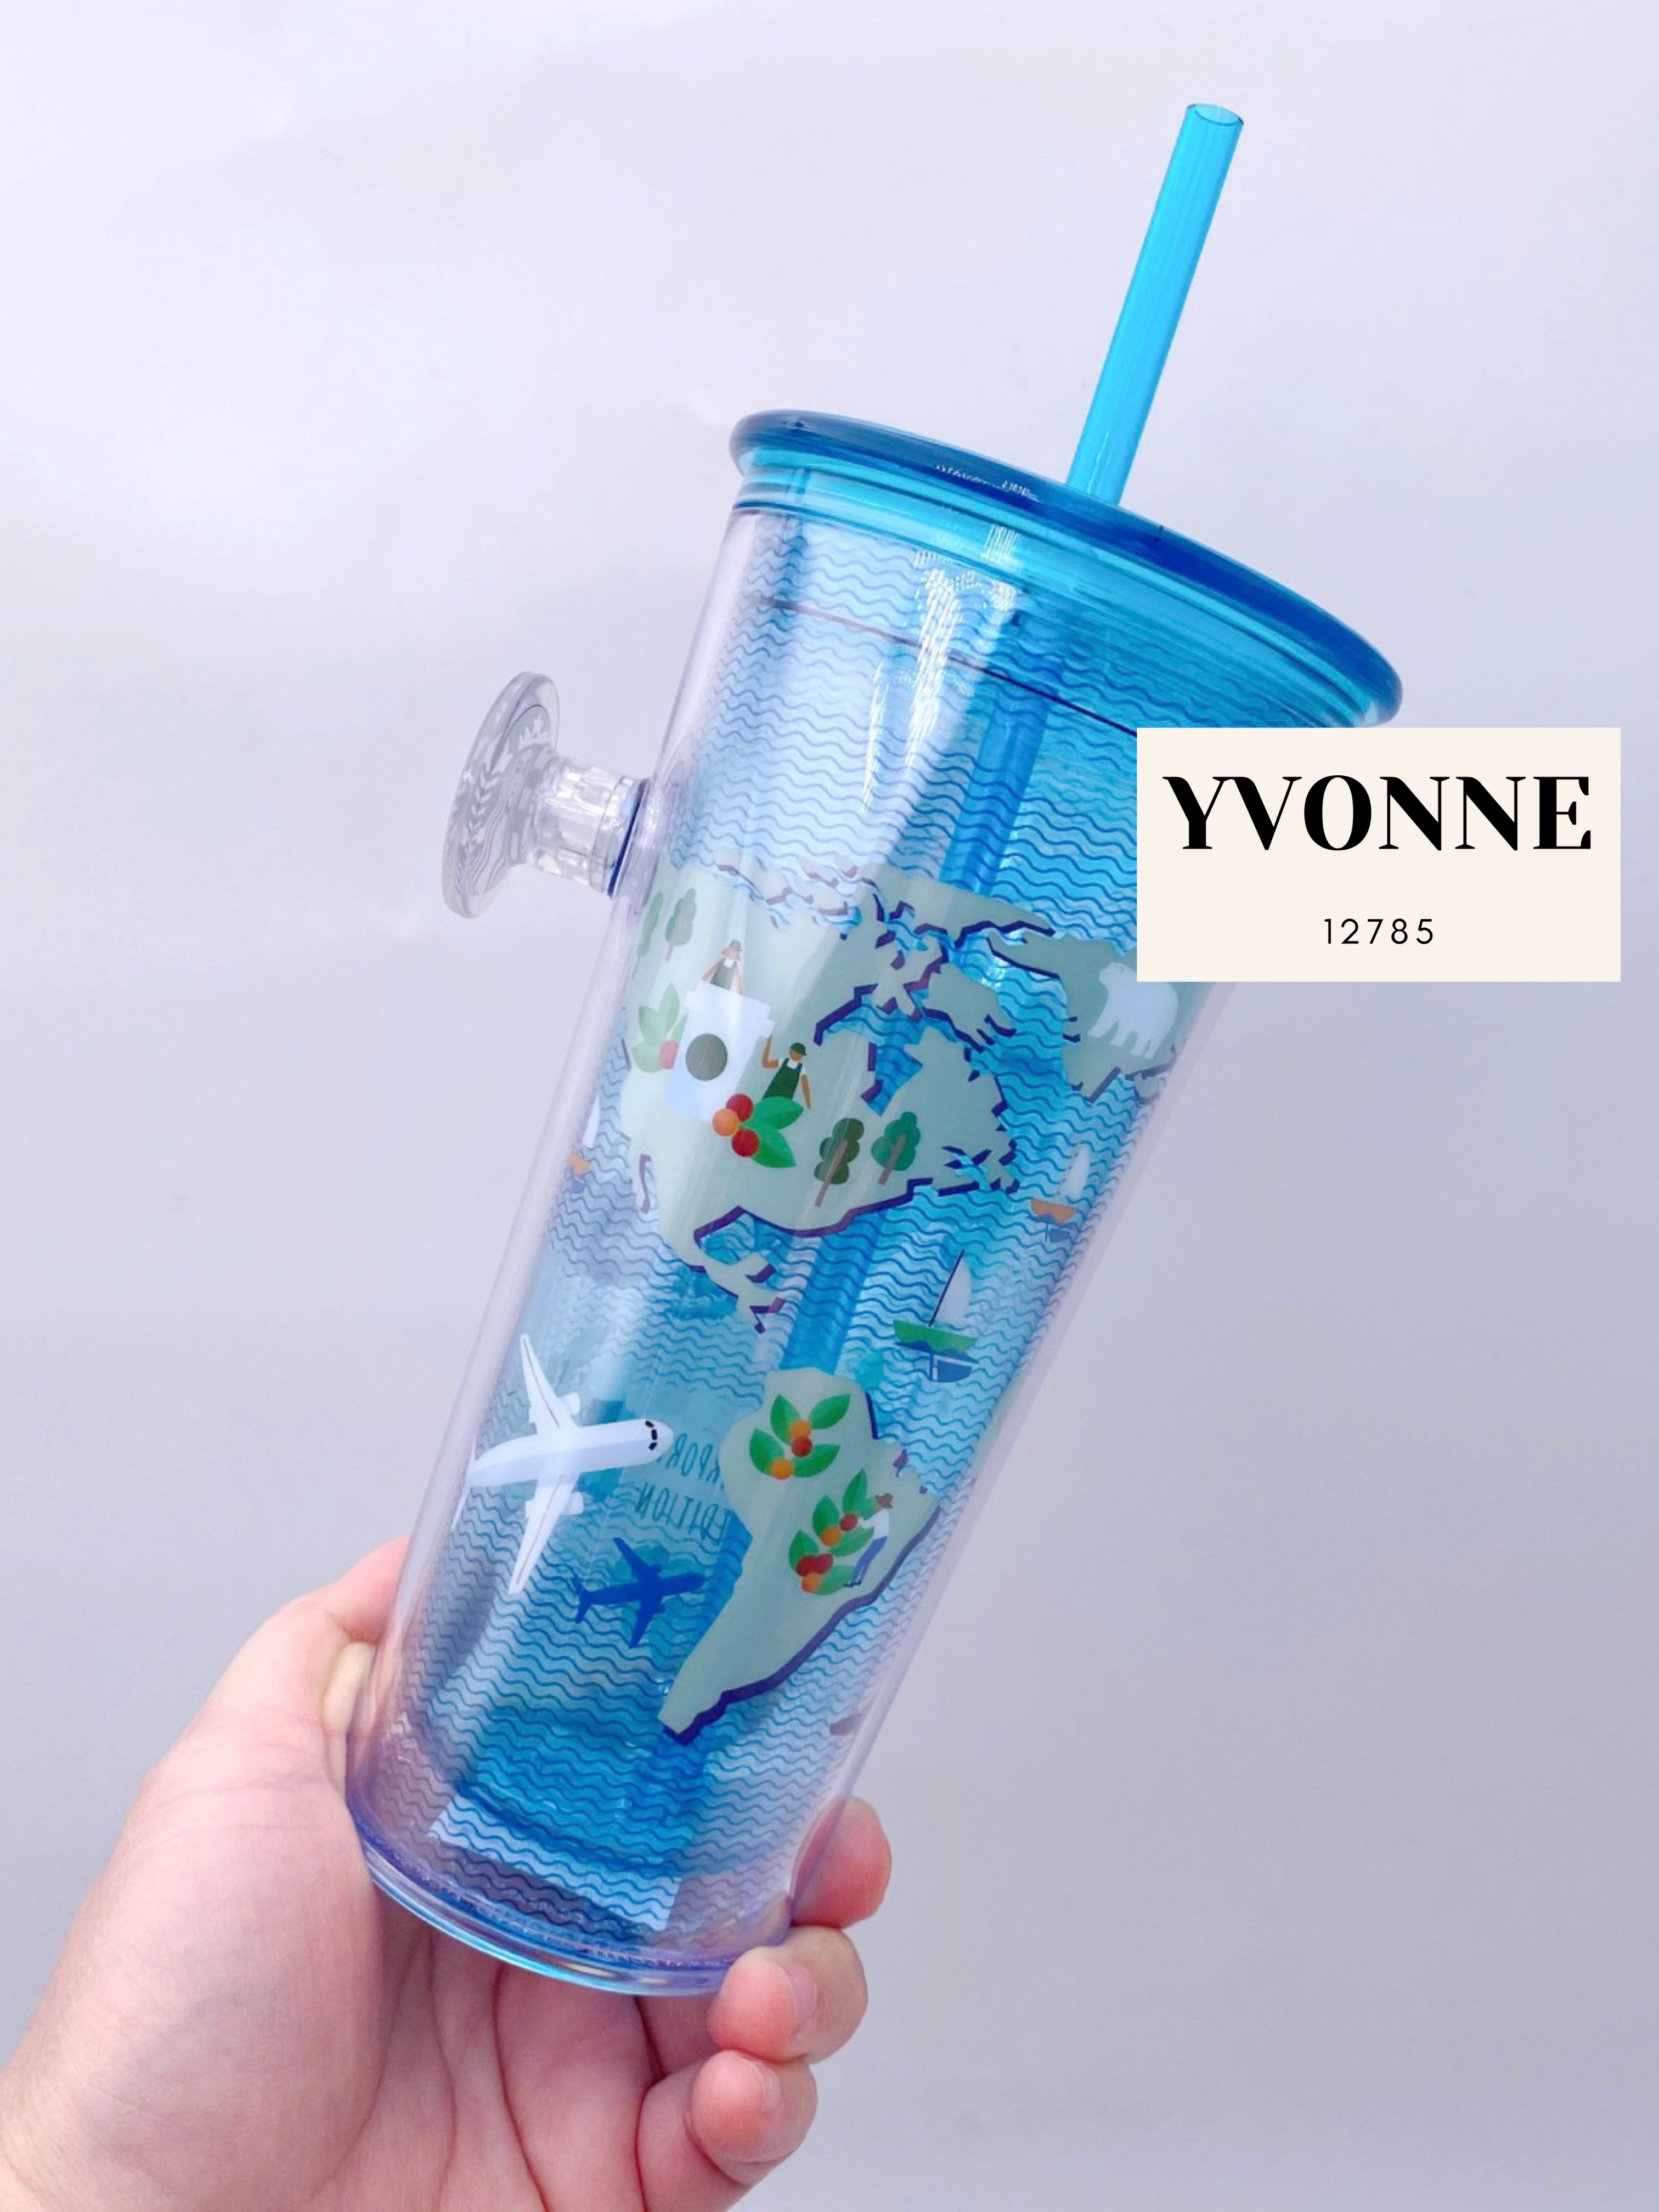 Starbucks Whale Classic Sea Straw Cup Glass Tumbler Cold Cup 